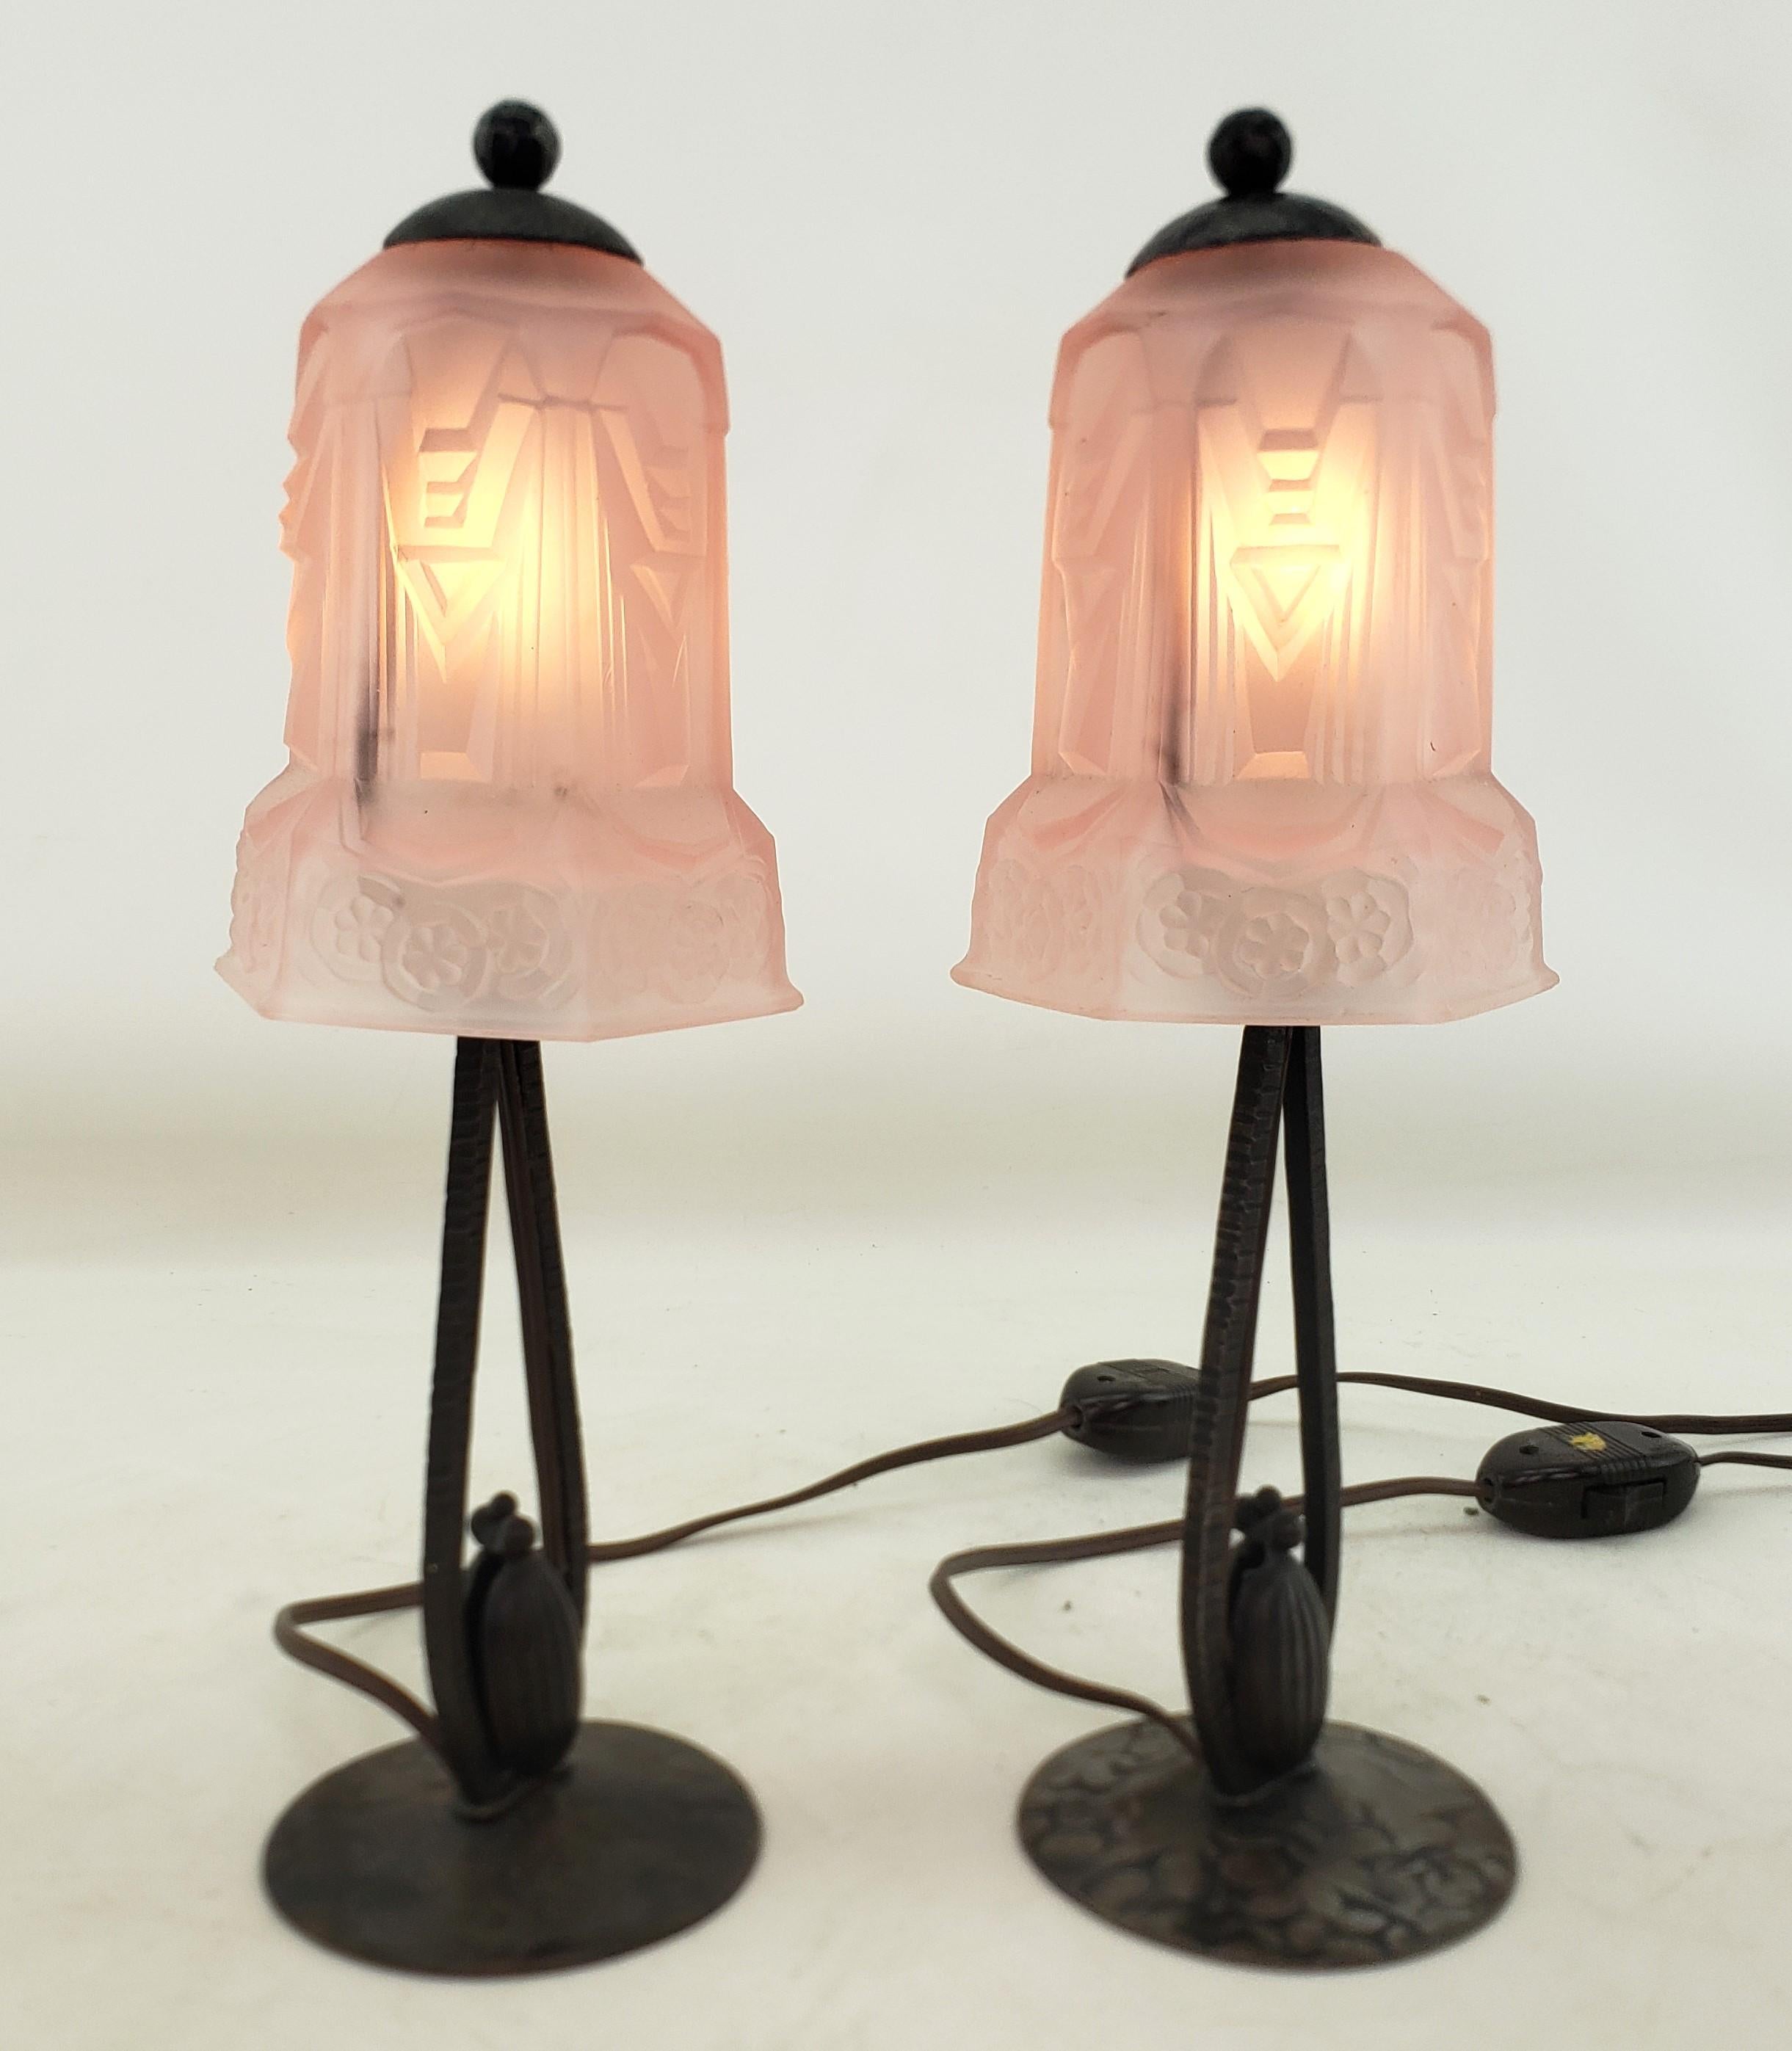 Pair of Antique Art Deco Bourdoir or Table Lamps with Frosted Pink Glass Shades In Good Condition For Sale In Hamilton, Ontario